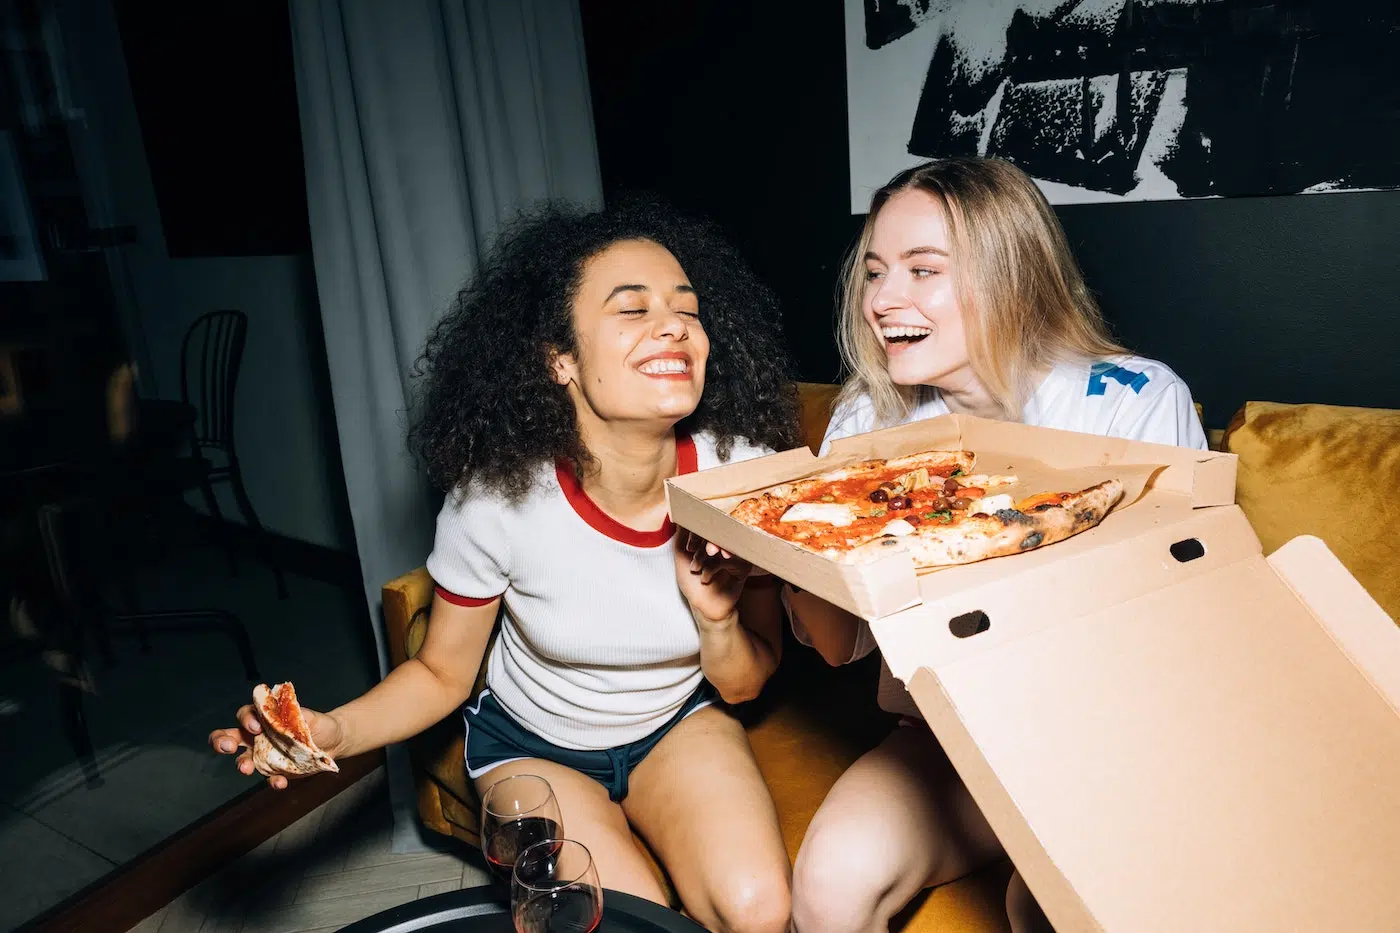 Girls share a joke with wine and pizza